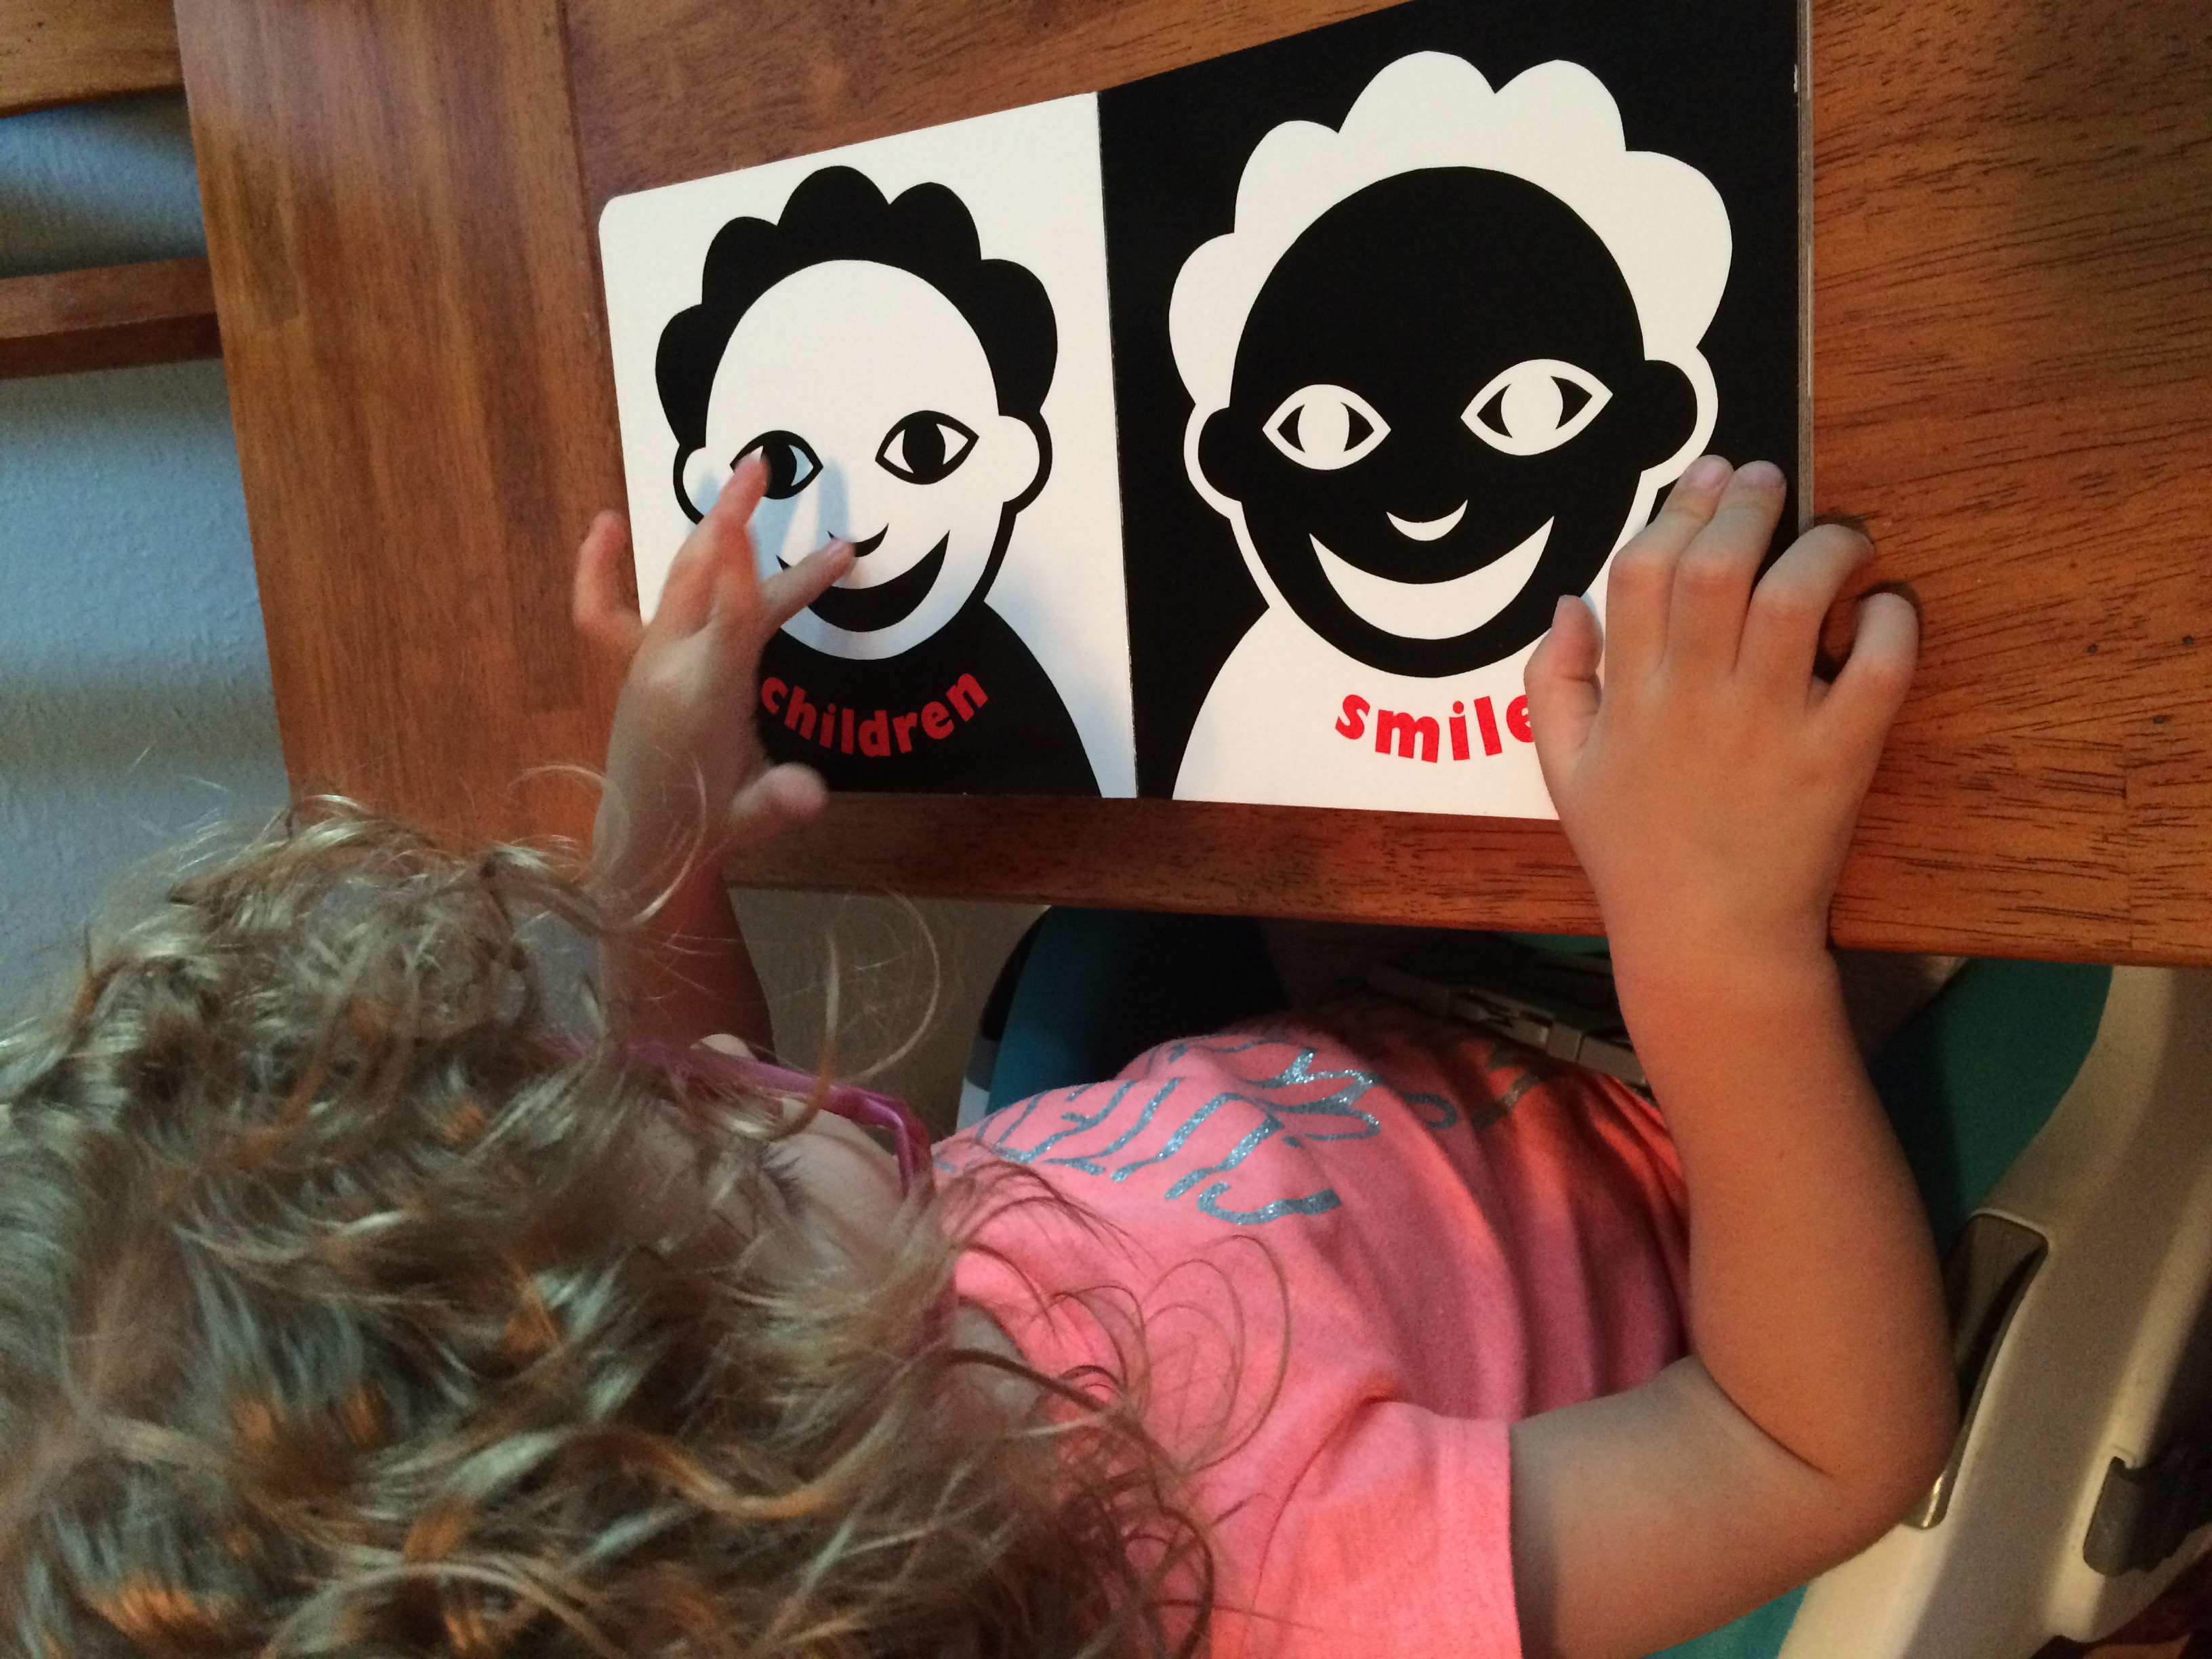 picture of olivia with black and white contrast images on cards of two faces that say smile